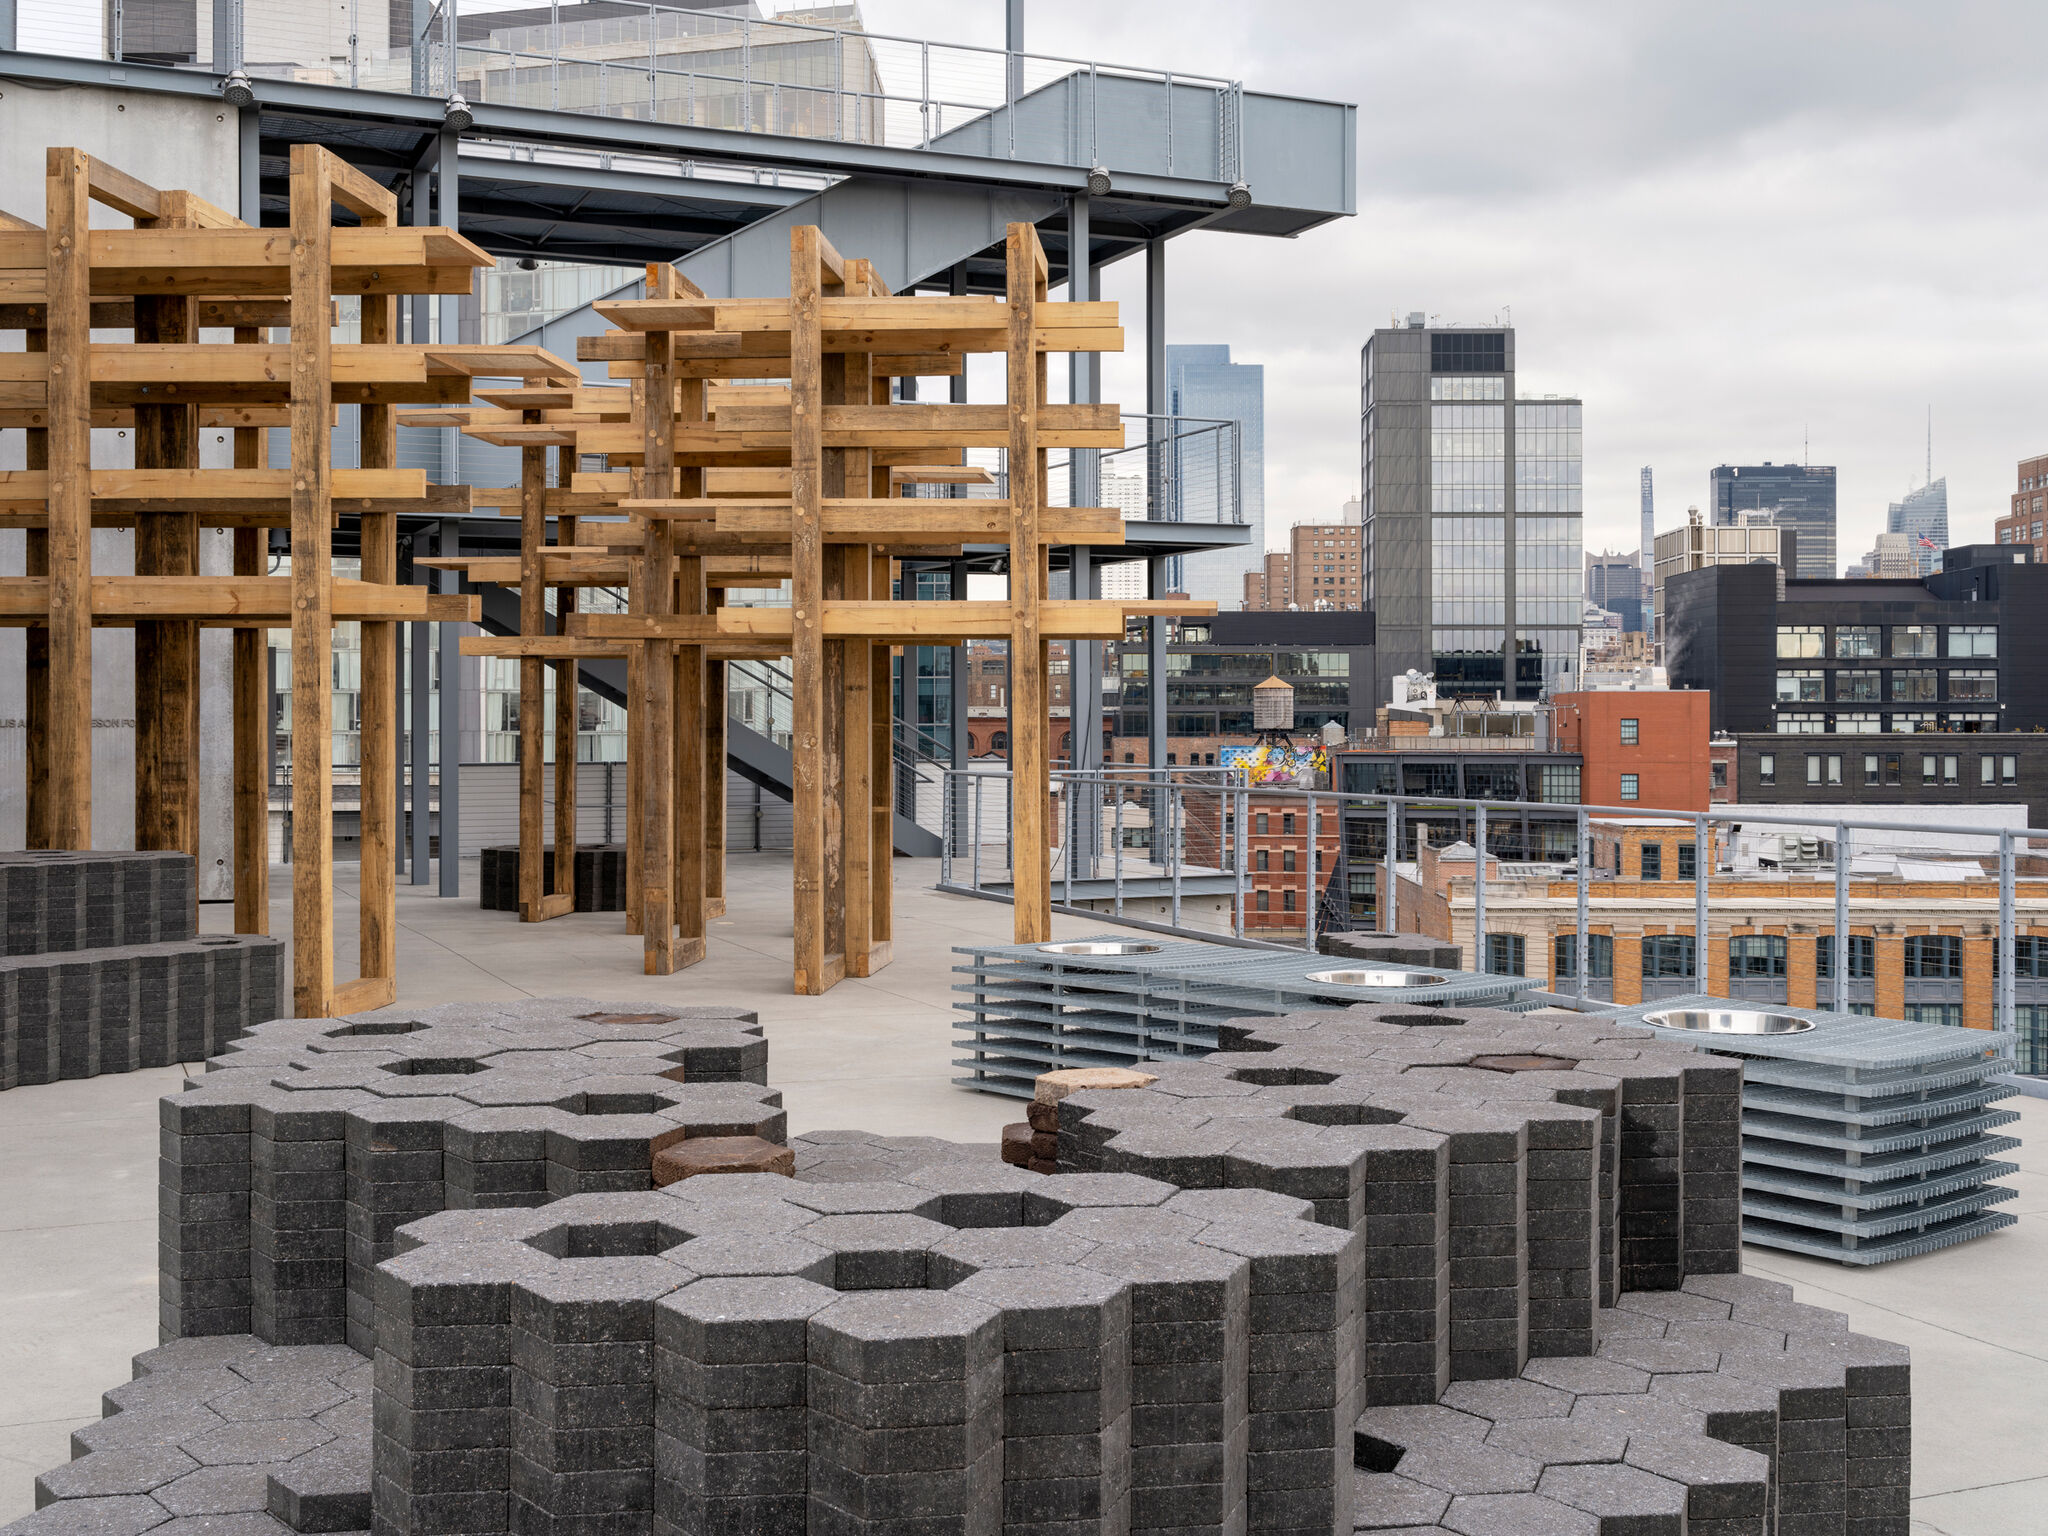 The terrace at the Whitney displaying a wood and cement construction of materials.